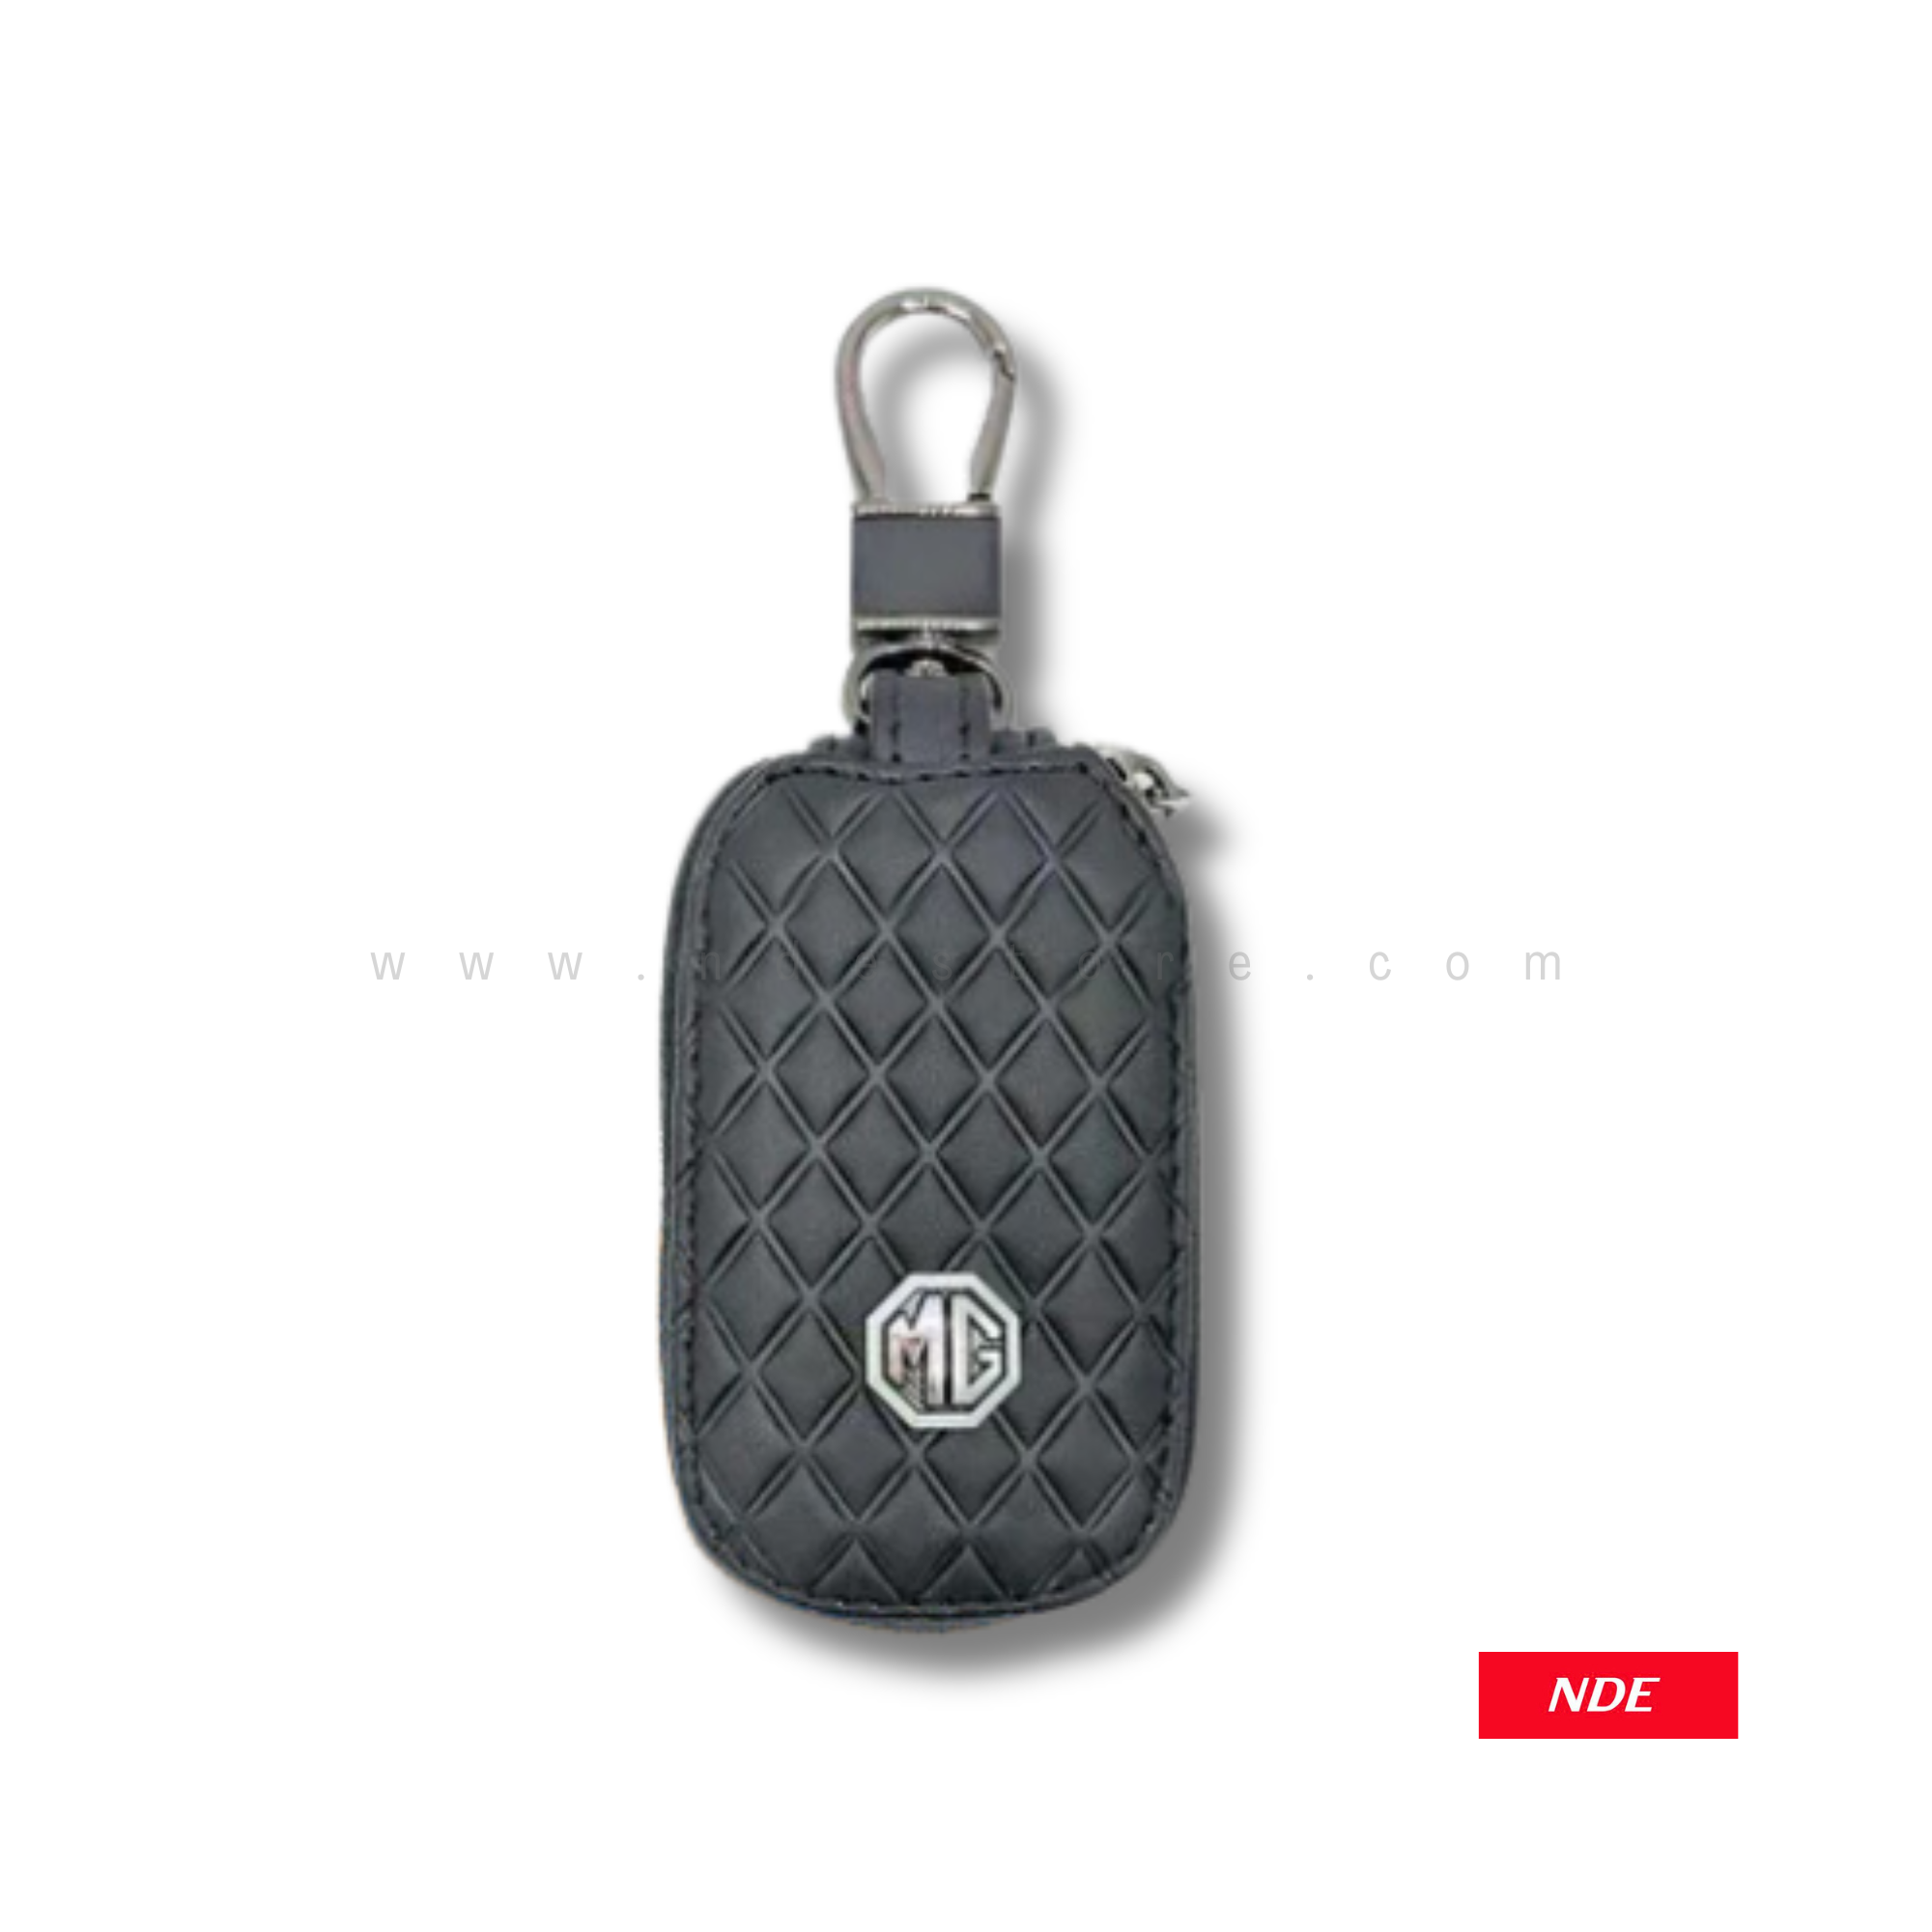 REMOTE COVER KEY POUCH PREMIUM LEATHER MATERIAL WITH MG LOGO (MADE IN CHINA)